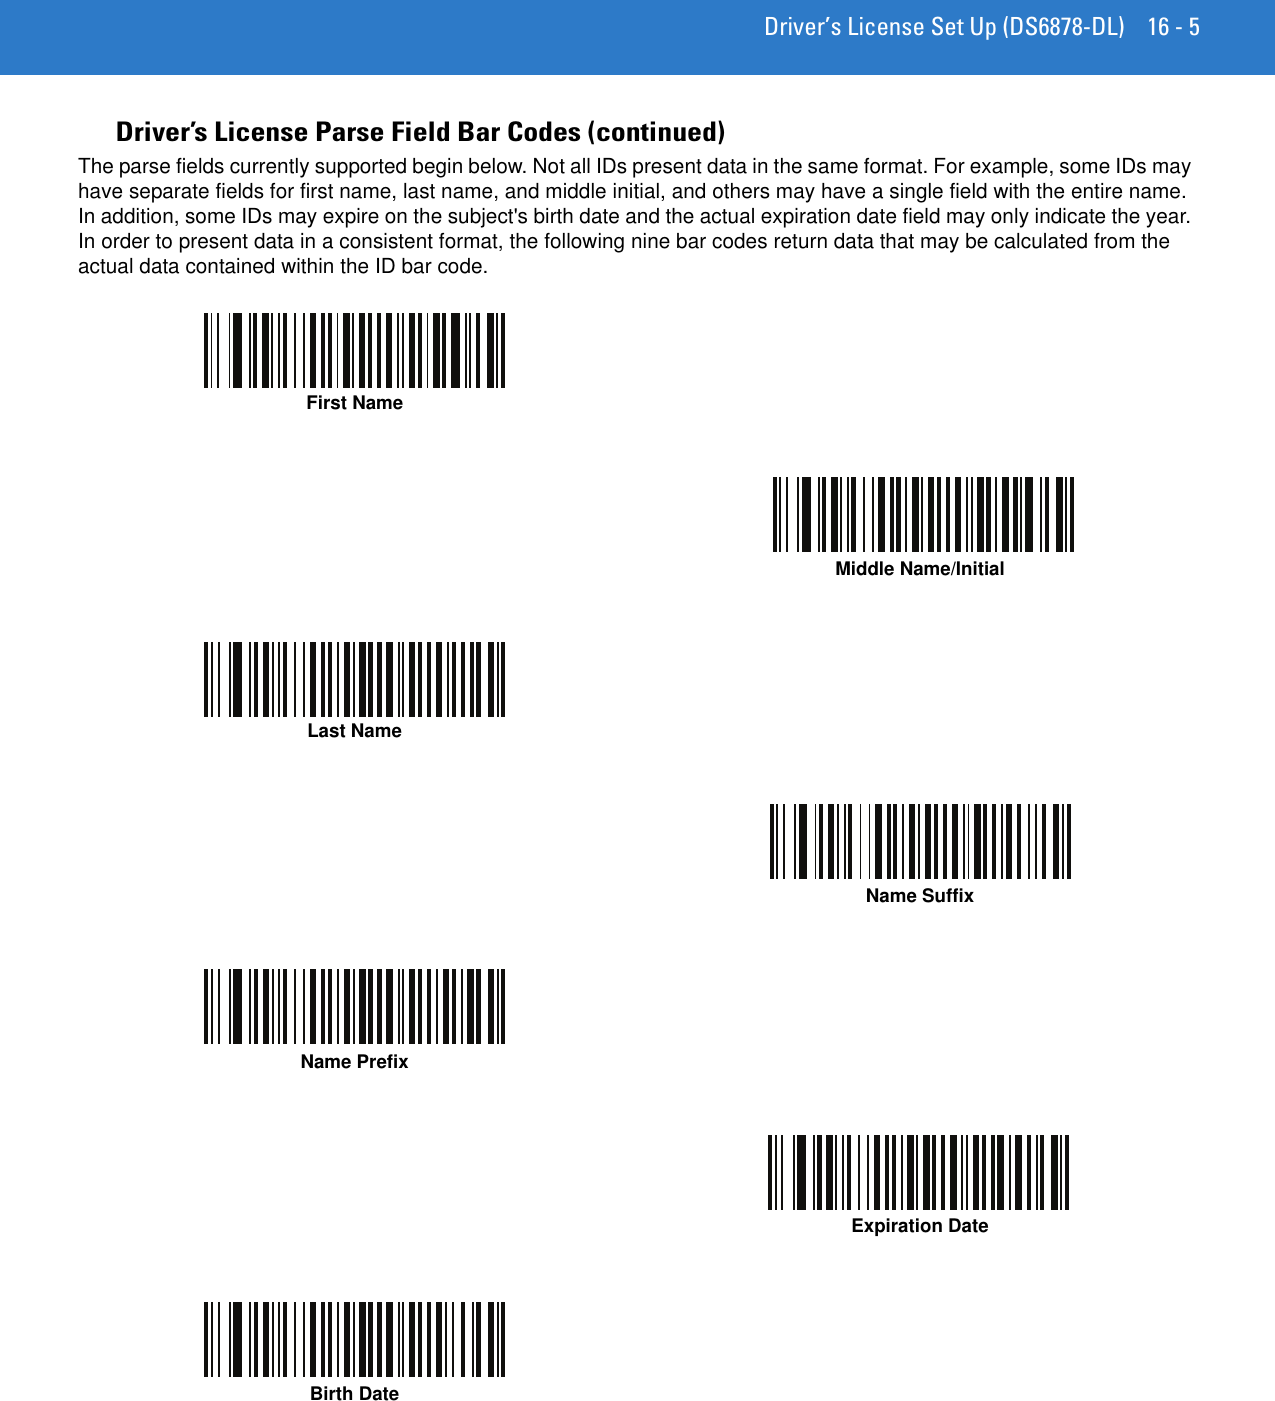 Driver’s License Set Up (DS6878-DL) 16 - 5Driver’s License Parse Field Bar Codes (continued)The parse fields currently supported begin below. Not all IDs present data in the same format. For example, some IDs may have separate fields for first name, last name, and middle initial, and others may have a single field with the entire name. In addition, some IDs may expire on the subject&apos;s birth date and the actual expiration date field may only indicate the year. In order to present data in a consistent format, the following nine bar codes return data that may be calculated from the actual data contained within the ID bar code.First NameMiddle Name/InitialLast NameName SuffixName PrefixExpiration DateBirth Date